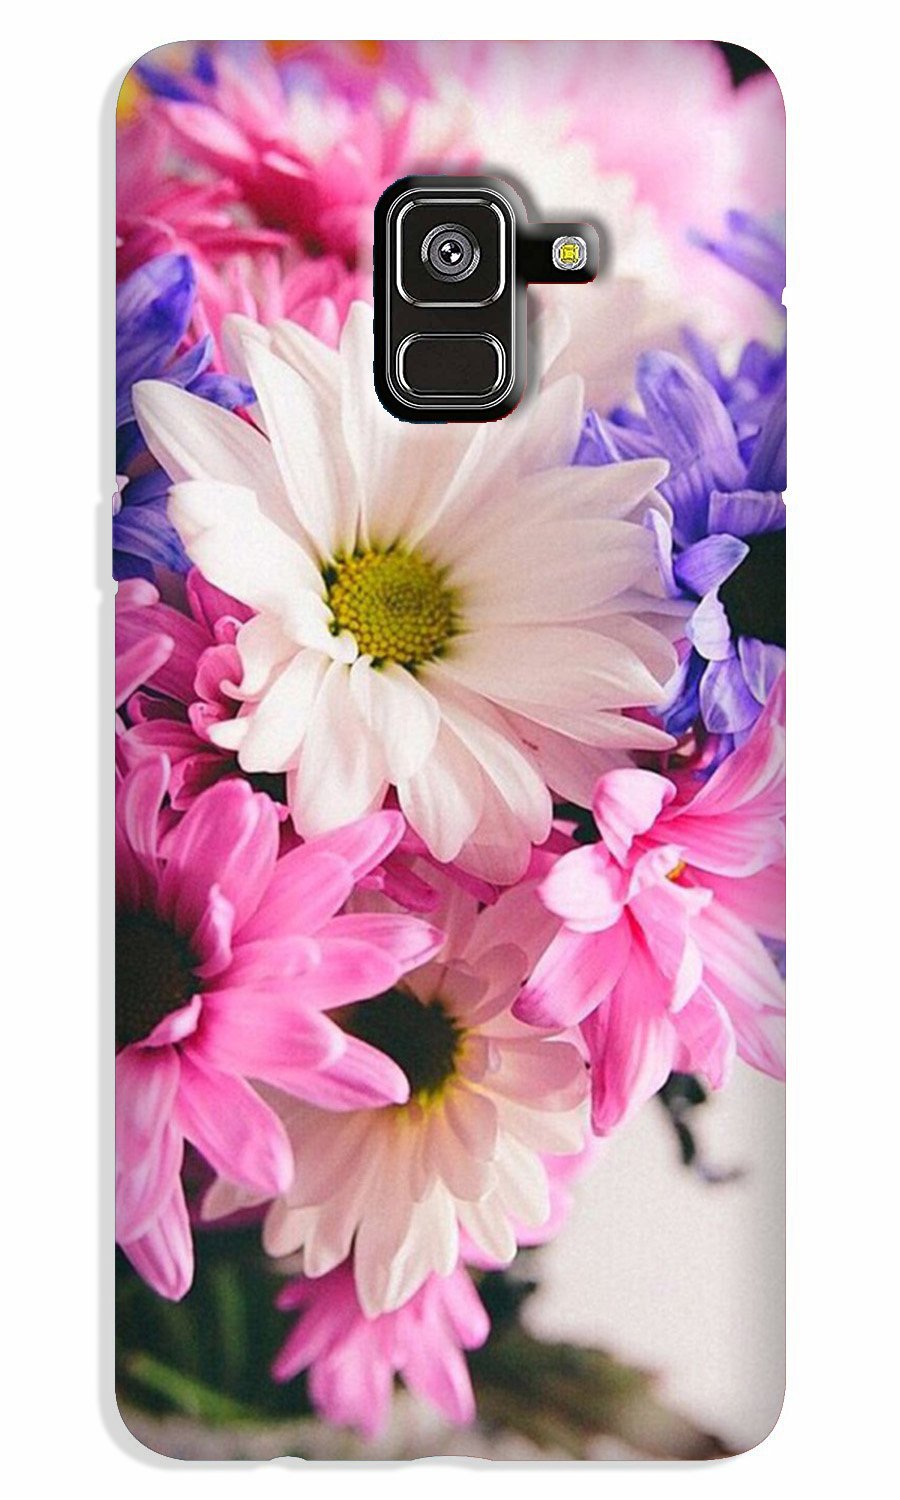 Coloful Daisy Case for Galaxy J6 / On6